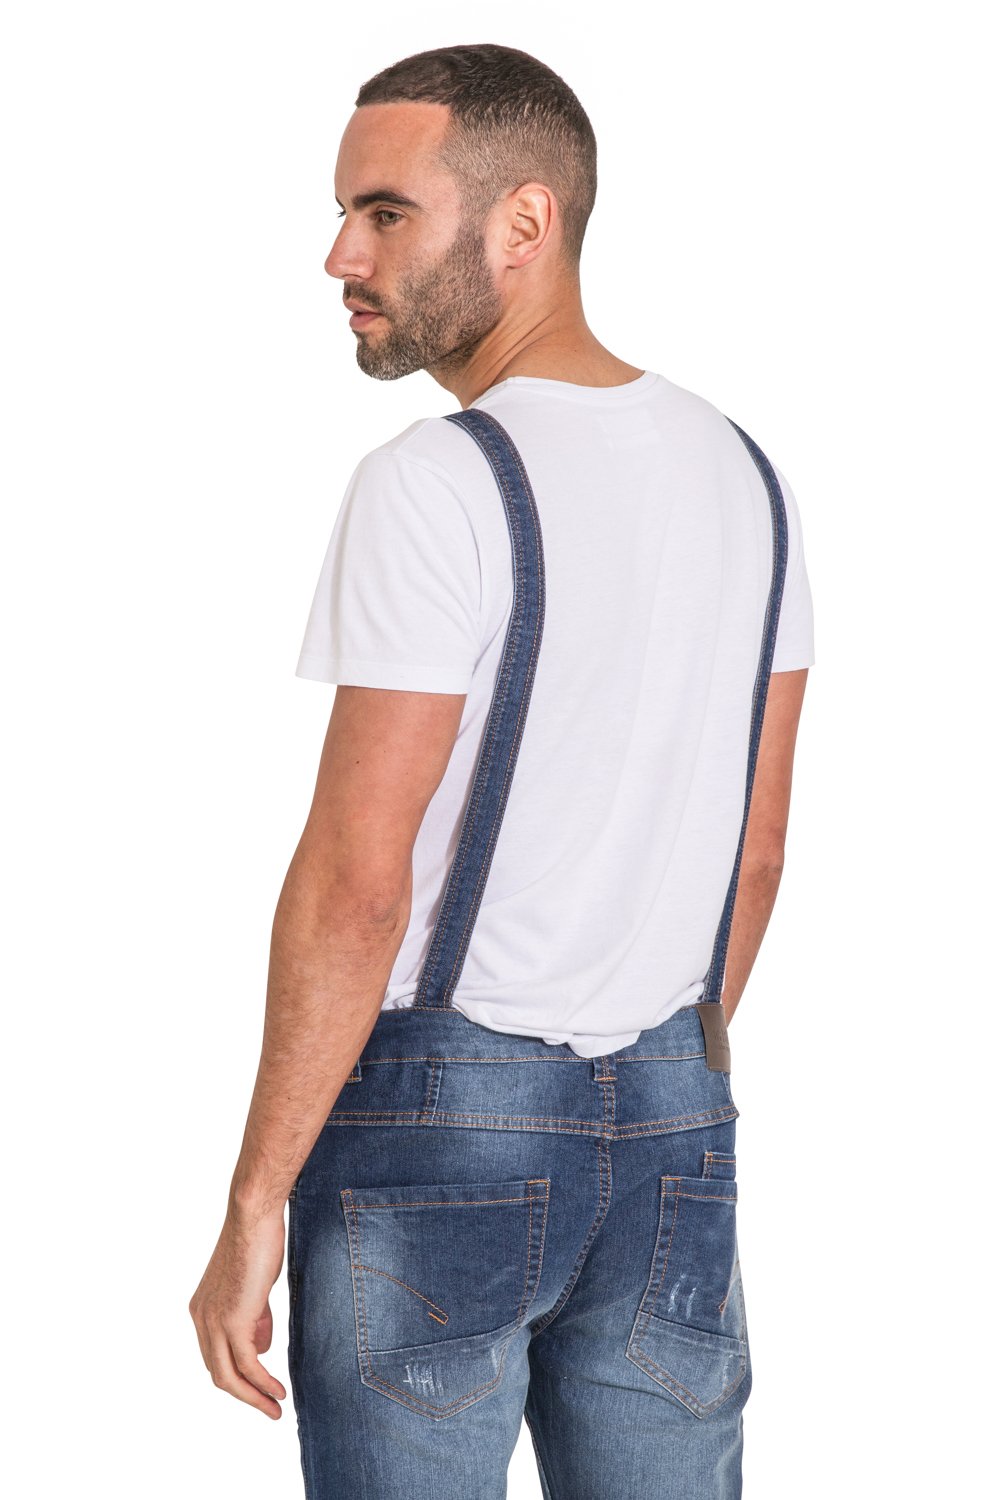 Top-half angled front-side view of super skinny blue denim Whitefield bib-overalls with clear view of belt loops, zip fly and straps.